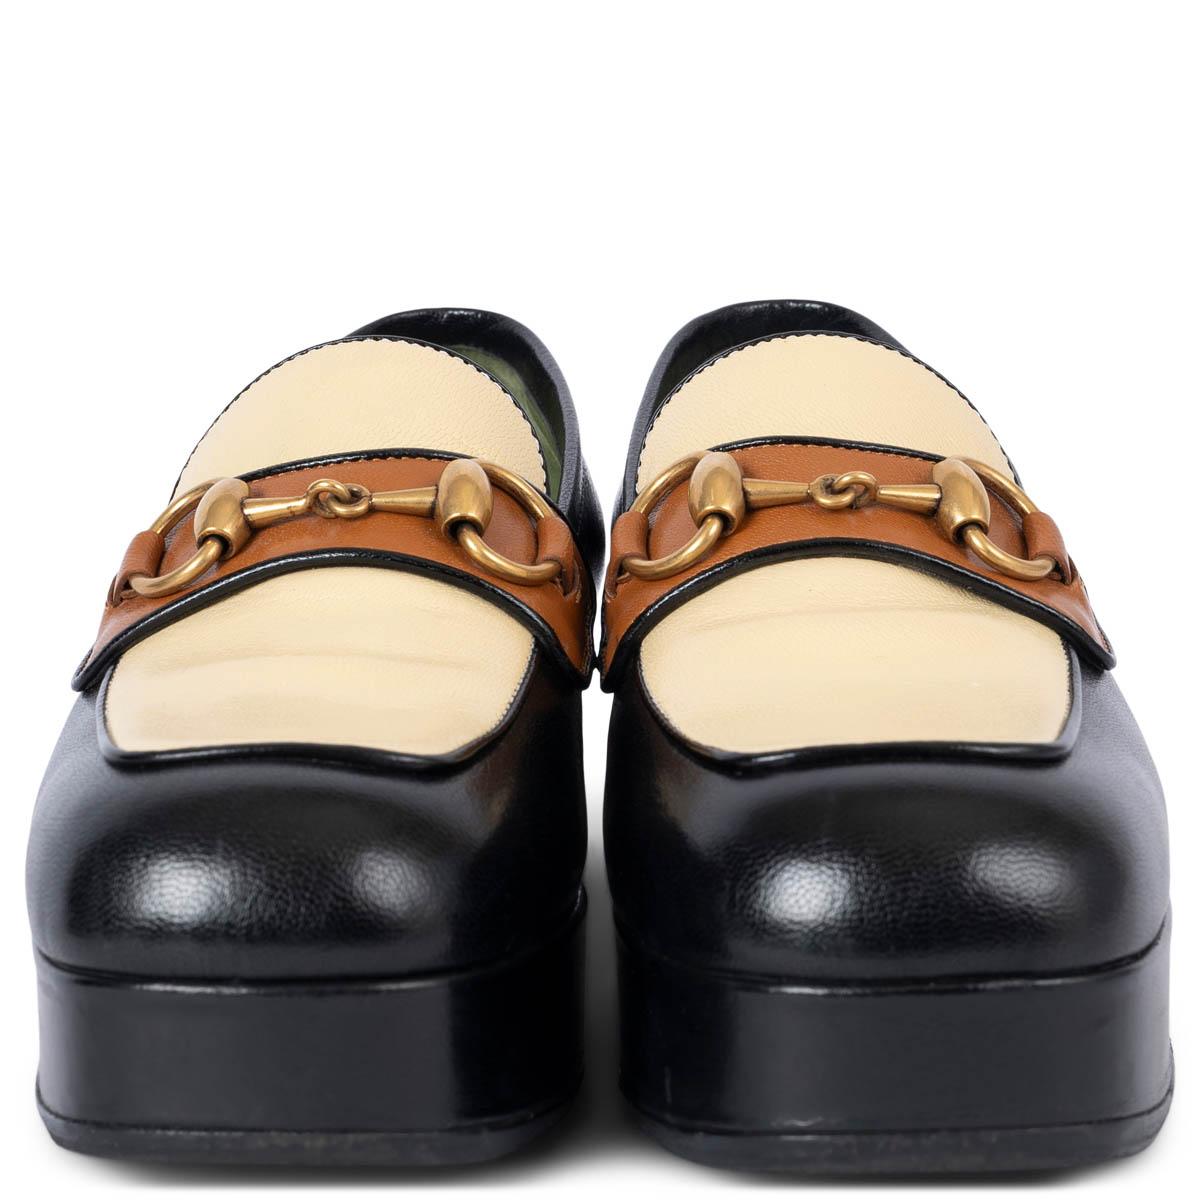 100% authentic Gucci 2019 Hosebit platform loafers in black, cream and tan smooth leather. Have been worn and are in excellent condition. Black rubber soles have been added. Come with dust bag. 

Measurements
Imprinted Size	36 fit 36.5
Shoe